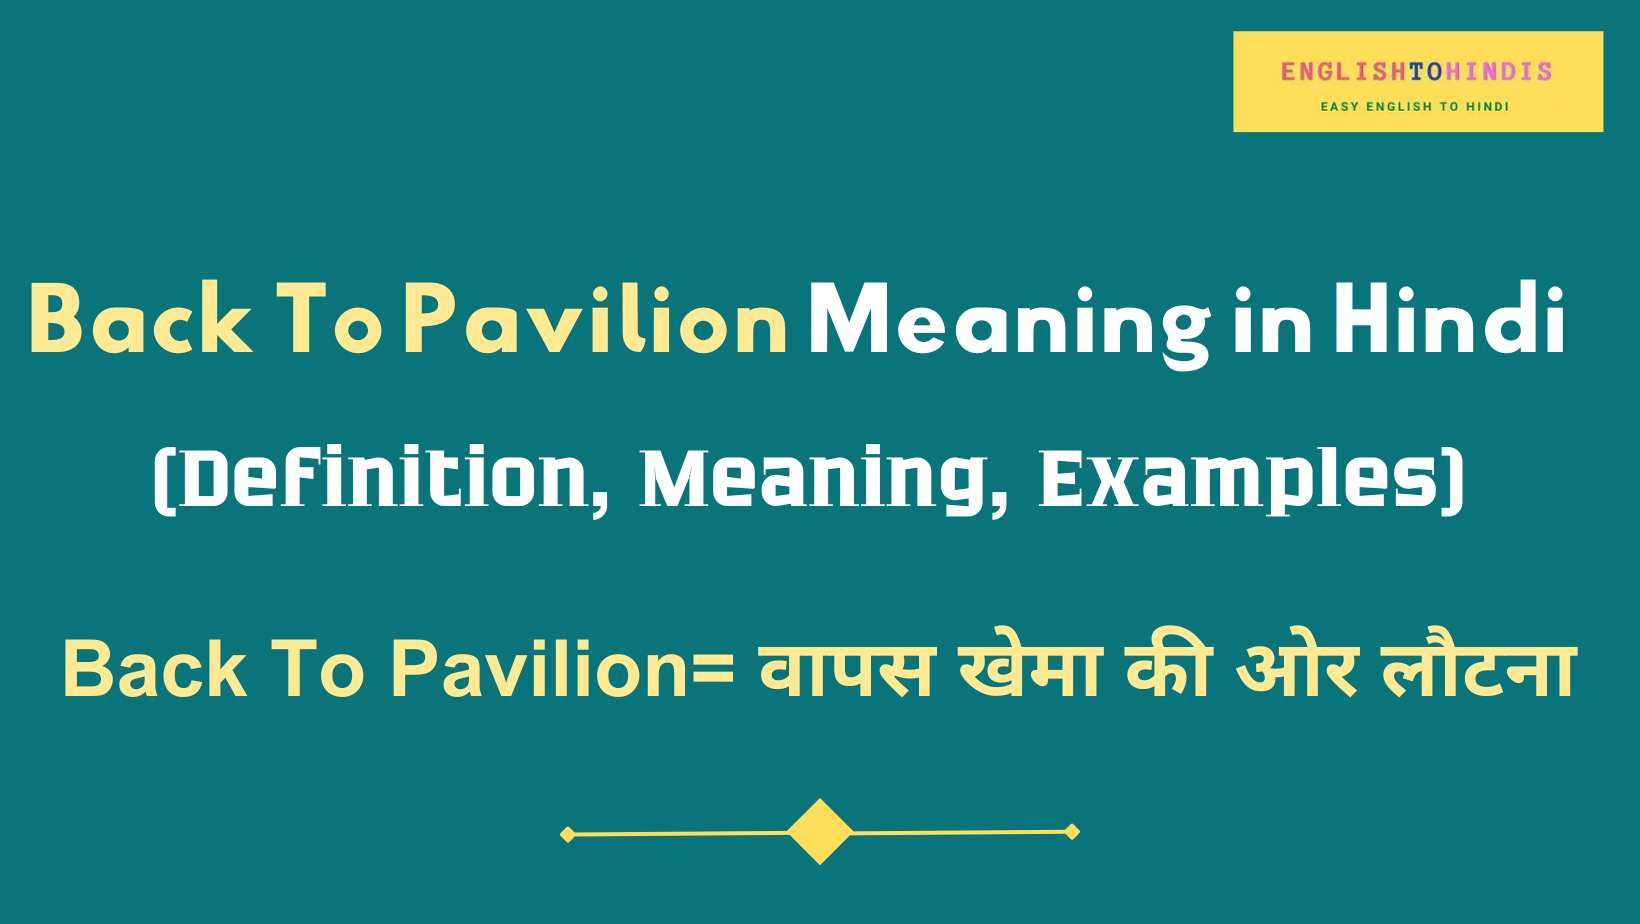 Back to Pavilion Meaning in Hindi